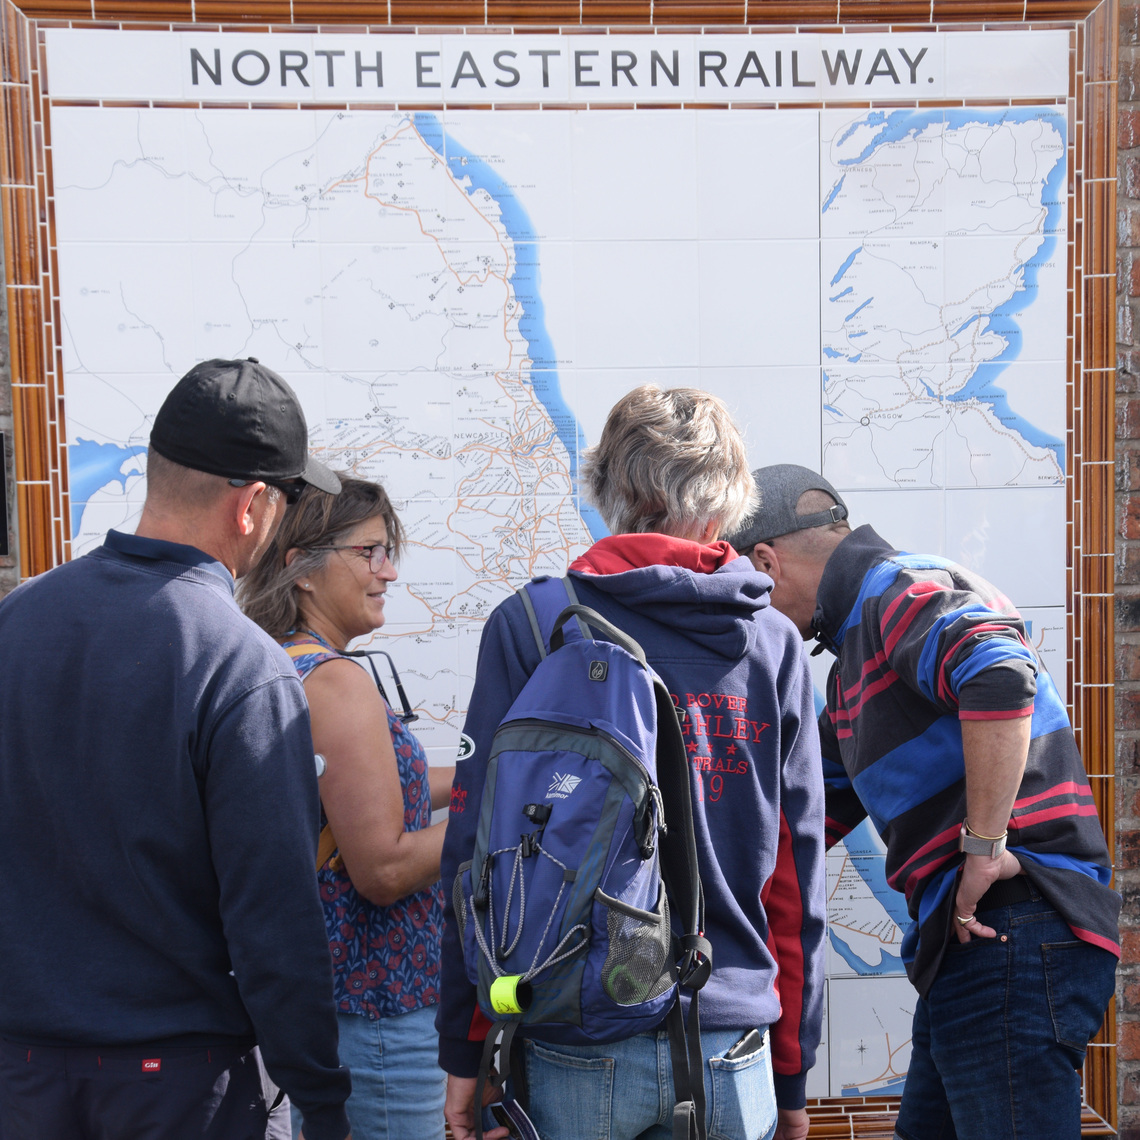 Heritage Day, looking at the Tile Map at Hunmanby Station